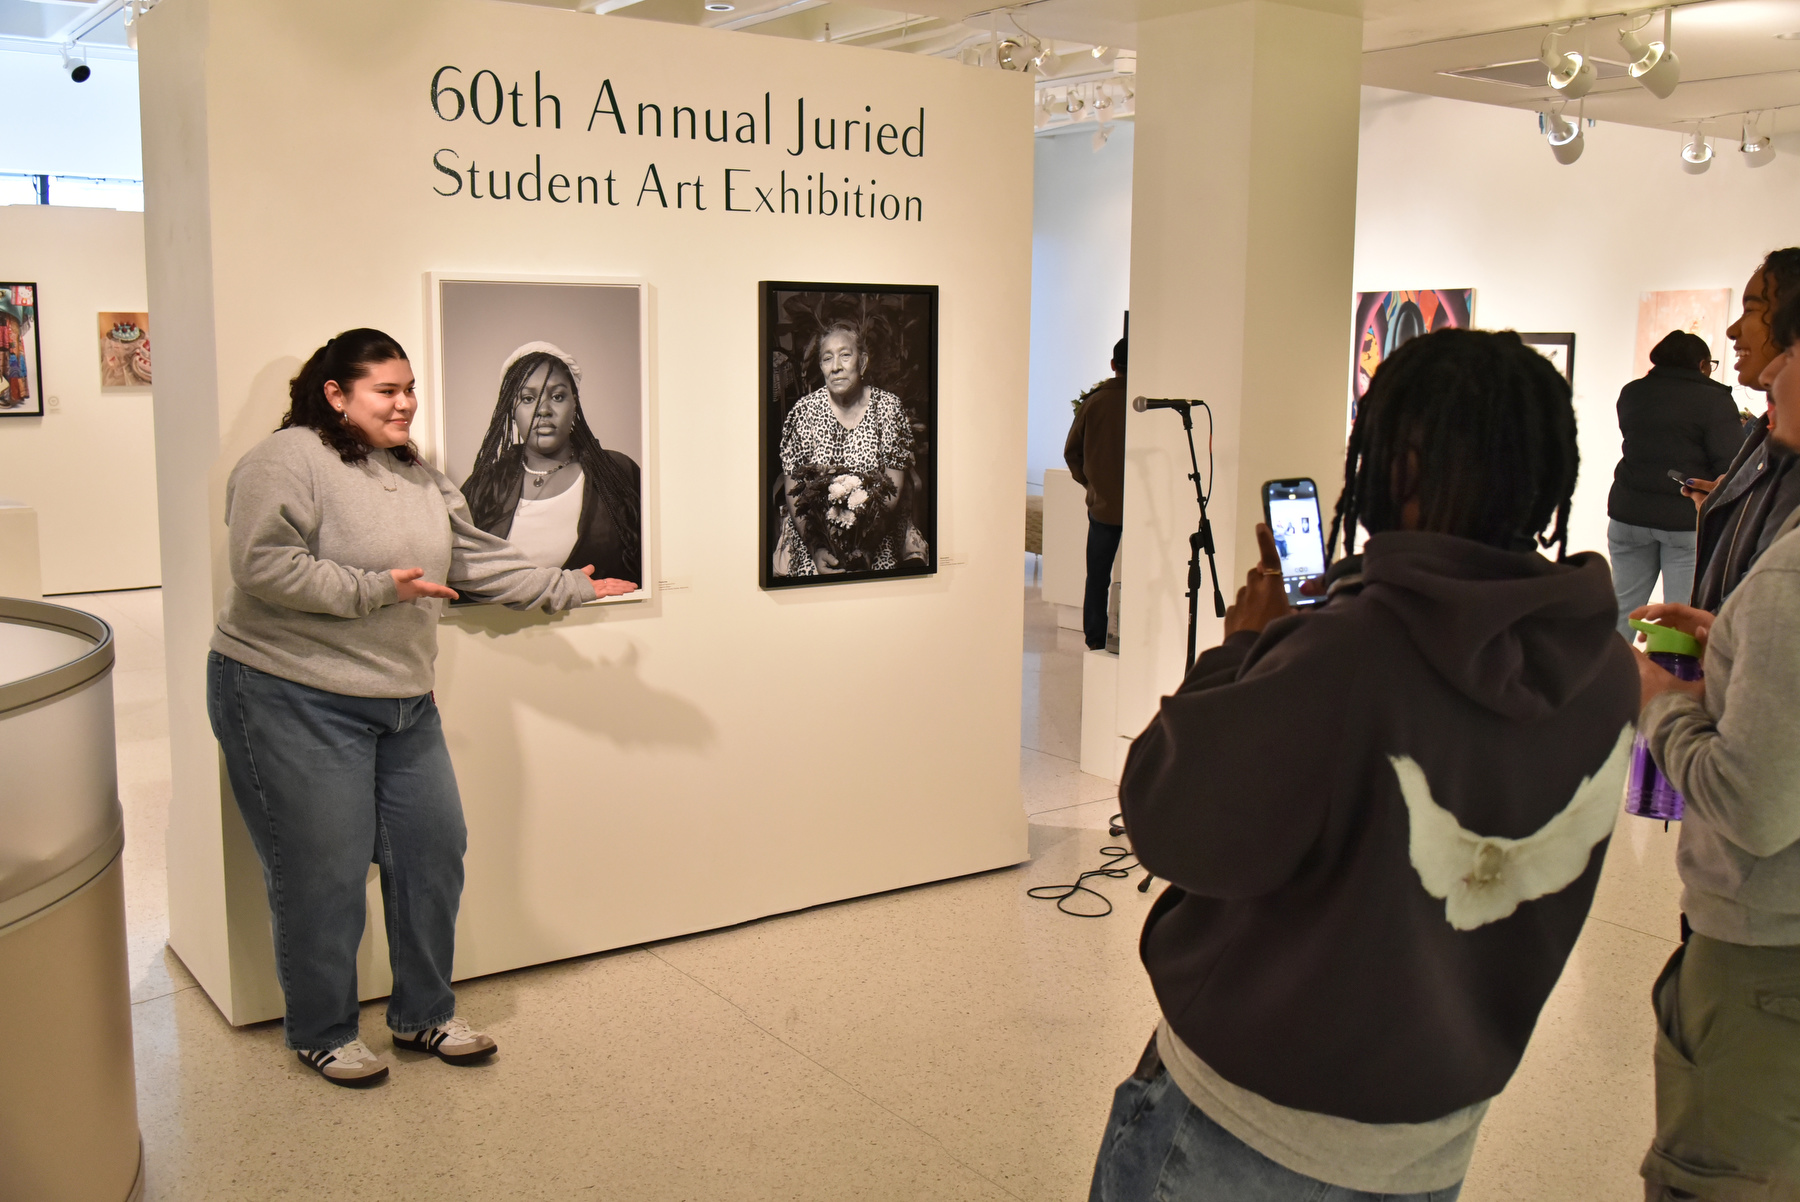 The 60th annual Juried Student Art Exhibition, open to all students to showcase their artistic talents, began with a reception March 24 in Tyler Art Gallery. Angelica Zelaya (pictured), a sophomore cinema and screen studies major, poses for a photo by friends with her large format archival pigment prints on display.